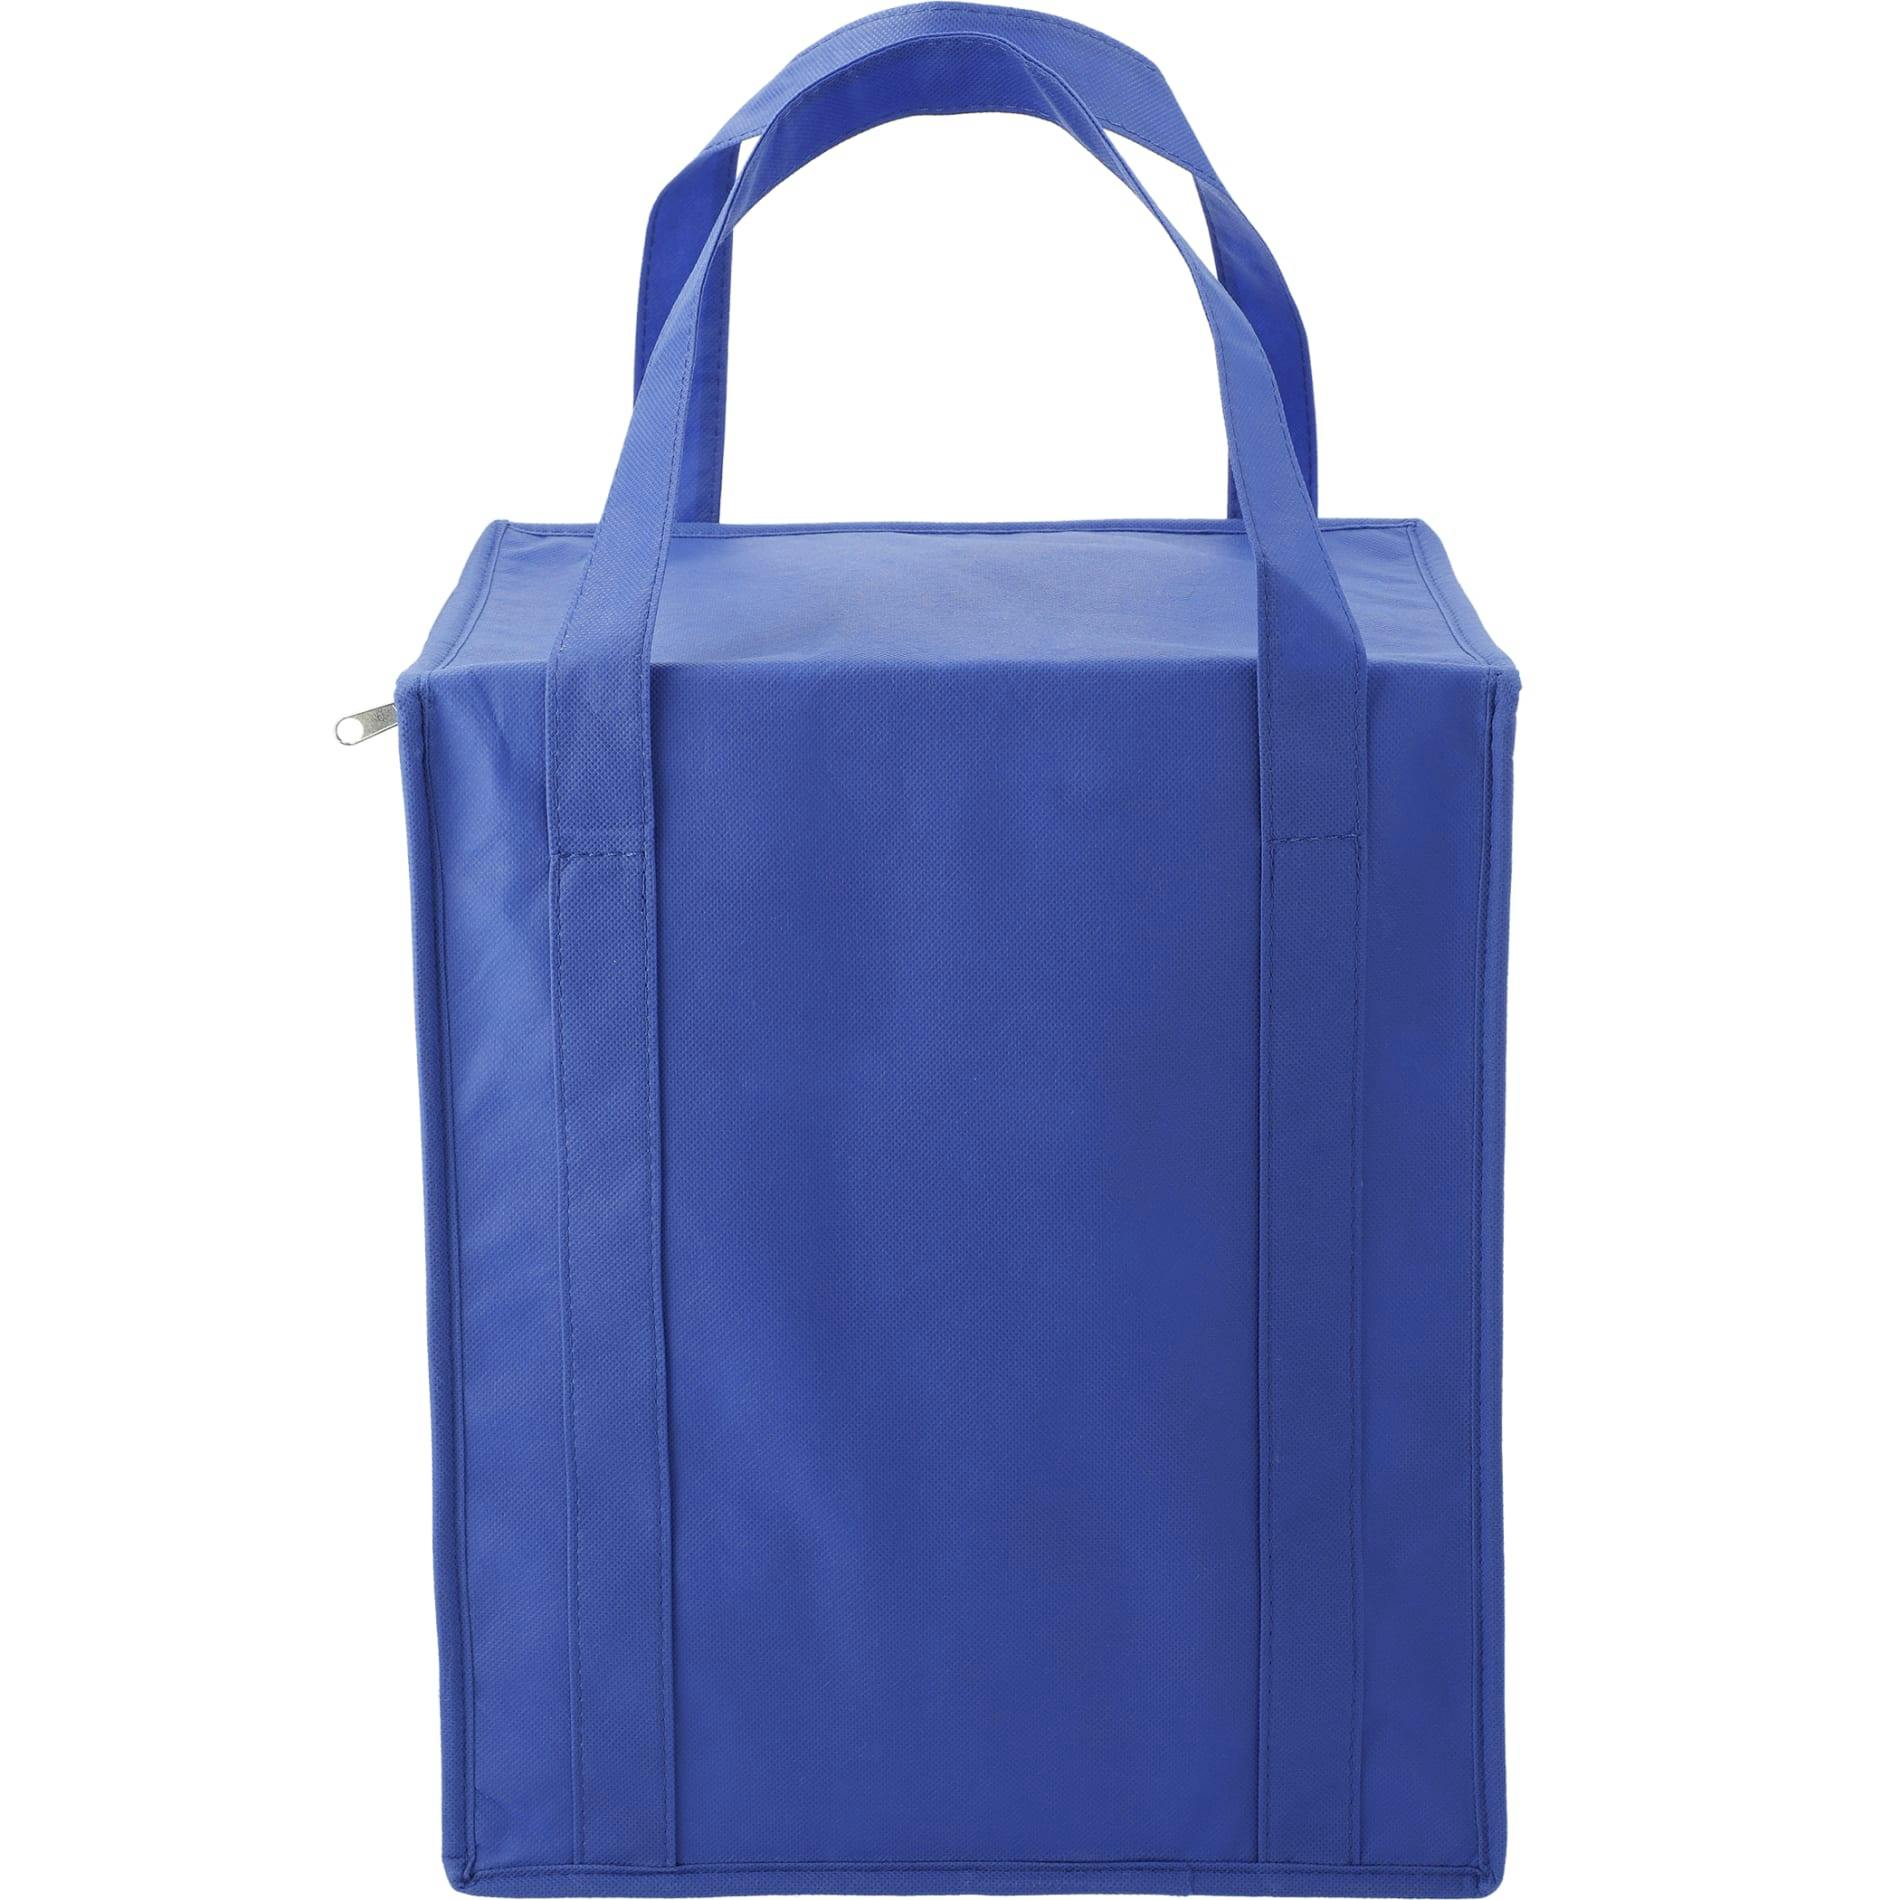 Hercules Flat Top Insulated Grocery Tote - additional Image 3